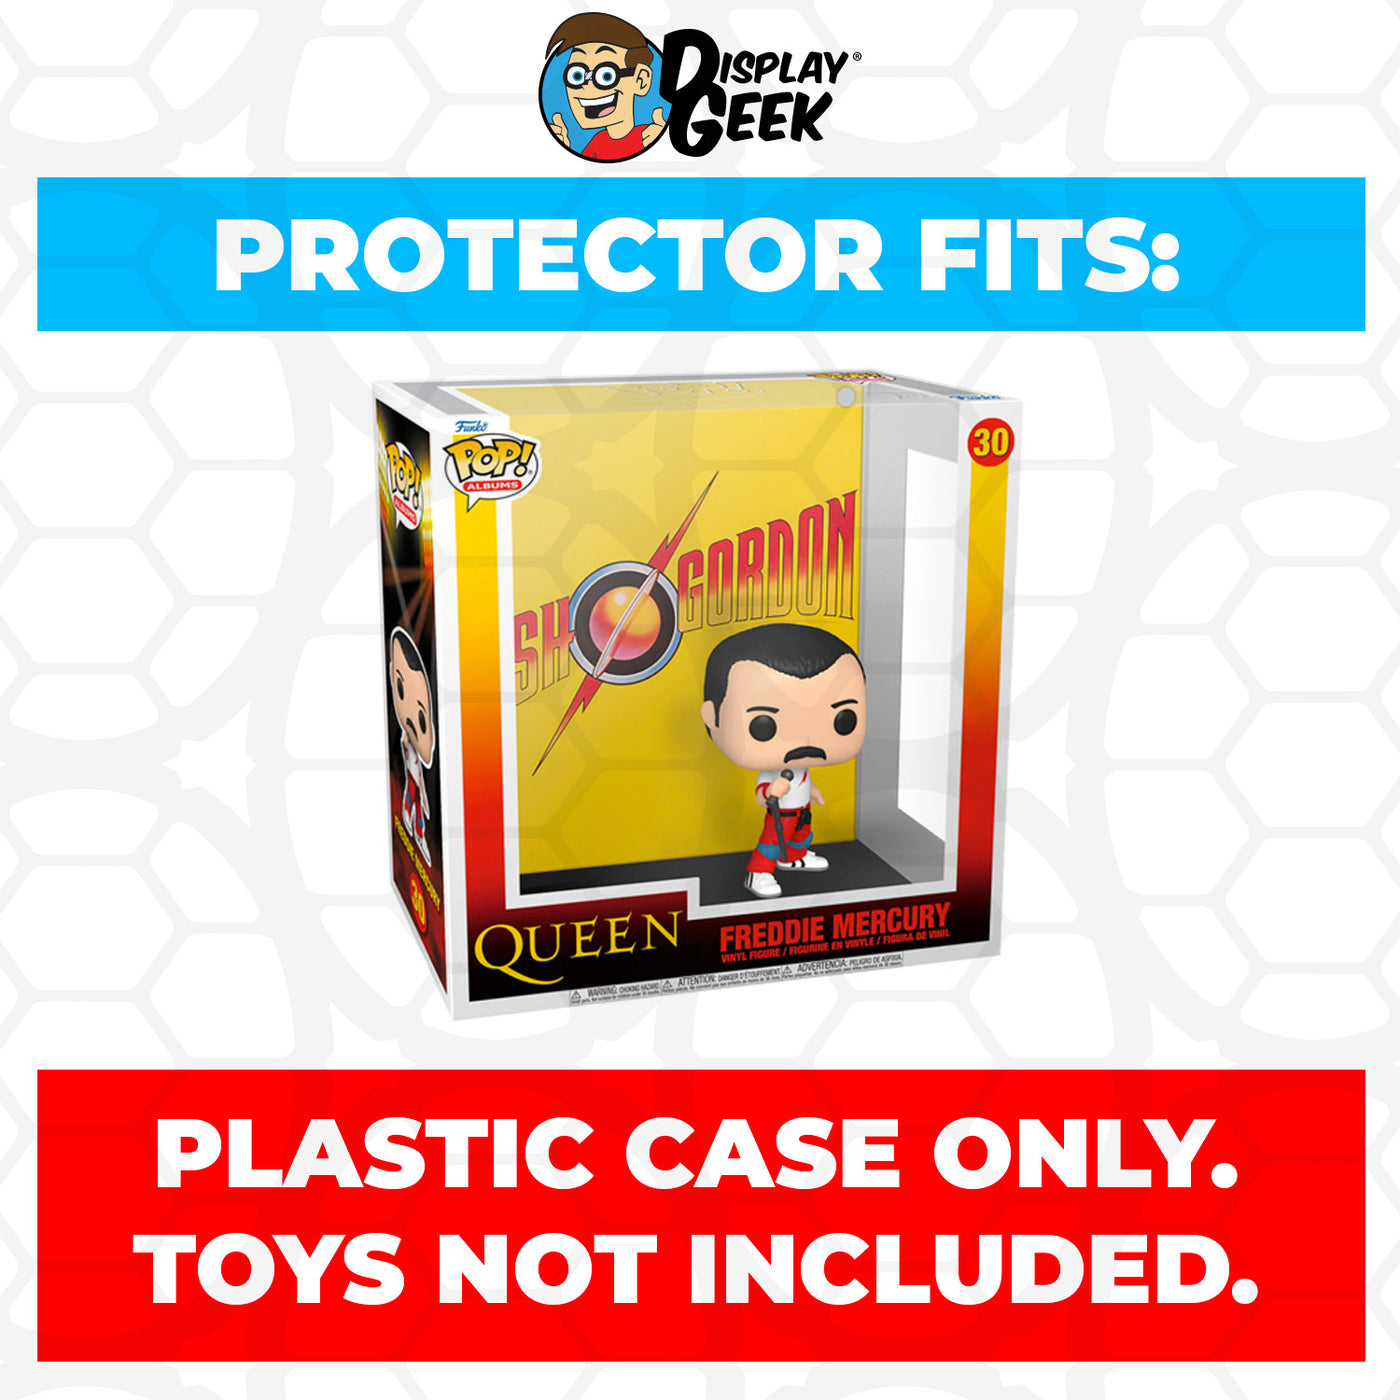 Pop Protector for Queen Flash Gordon #30 Funko Pop Albums on The Protector Guide App by Display Geek